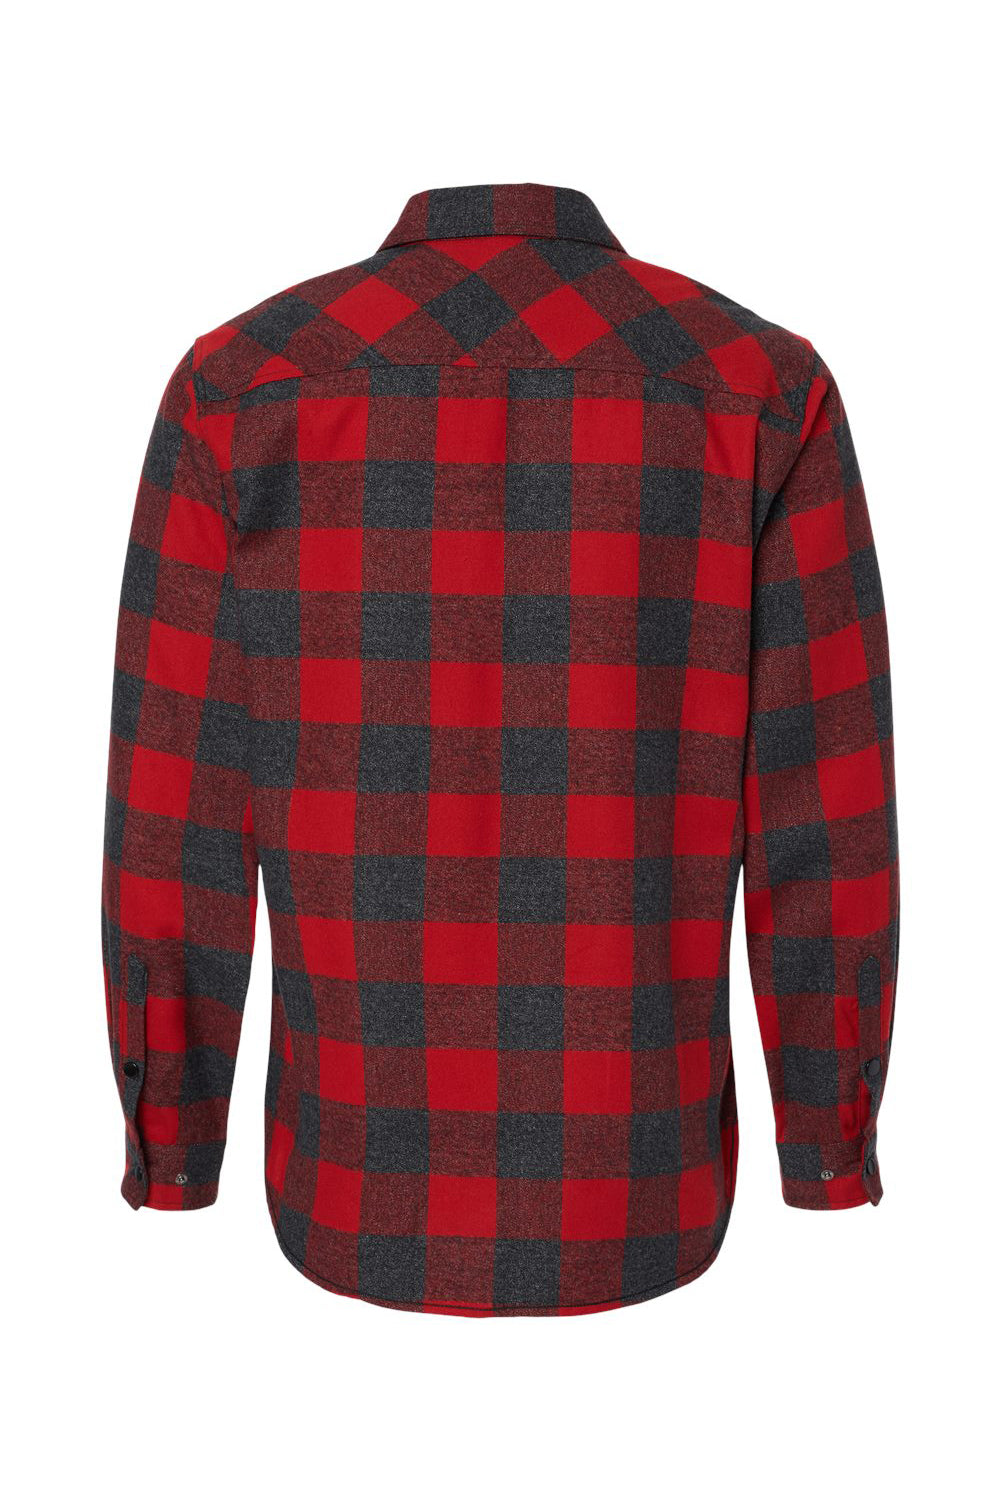 Burnside 8219 Mens Plaid Flannel Long Sleeve Snap Down Shirt w/ Double Pockets Red/Heather Black Flat Back